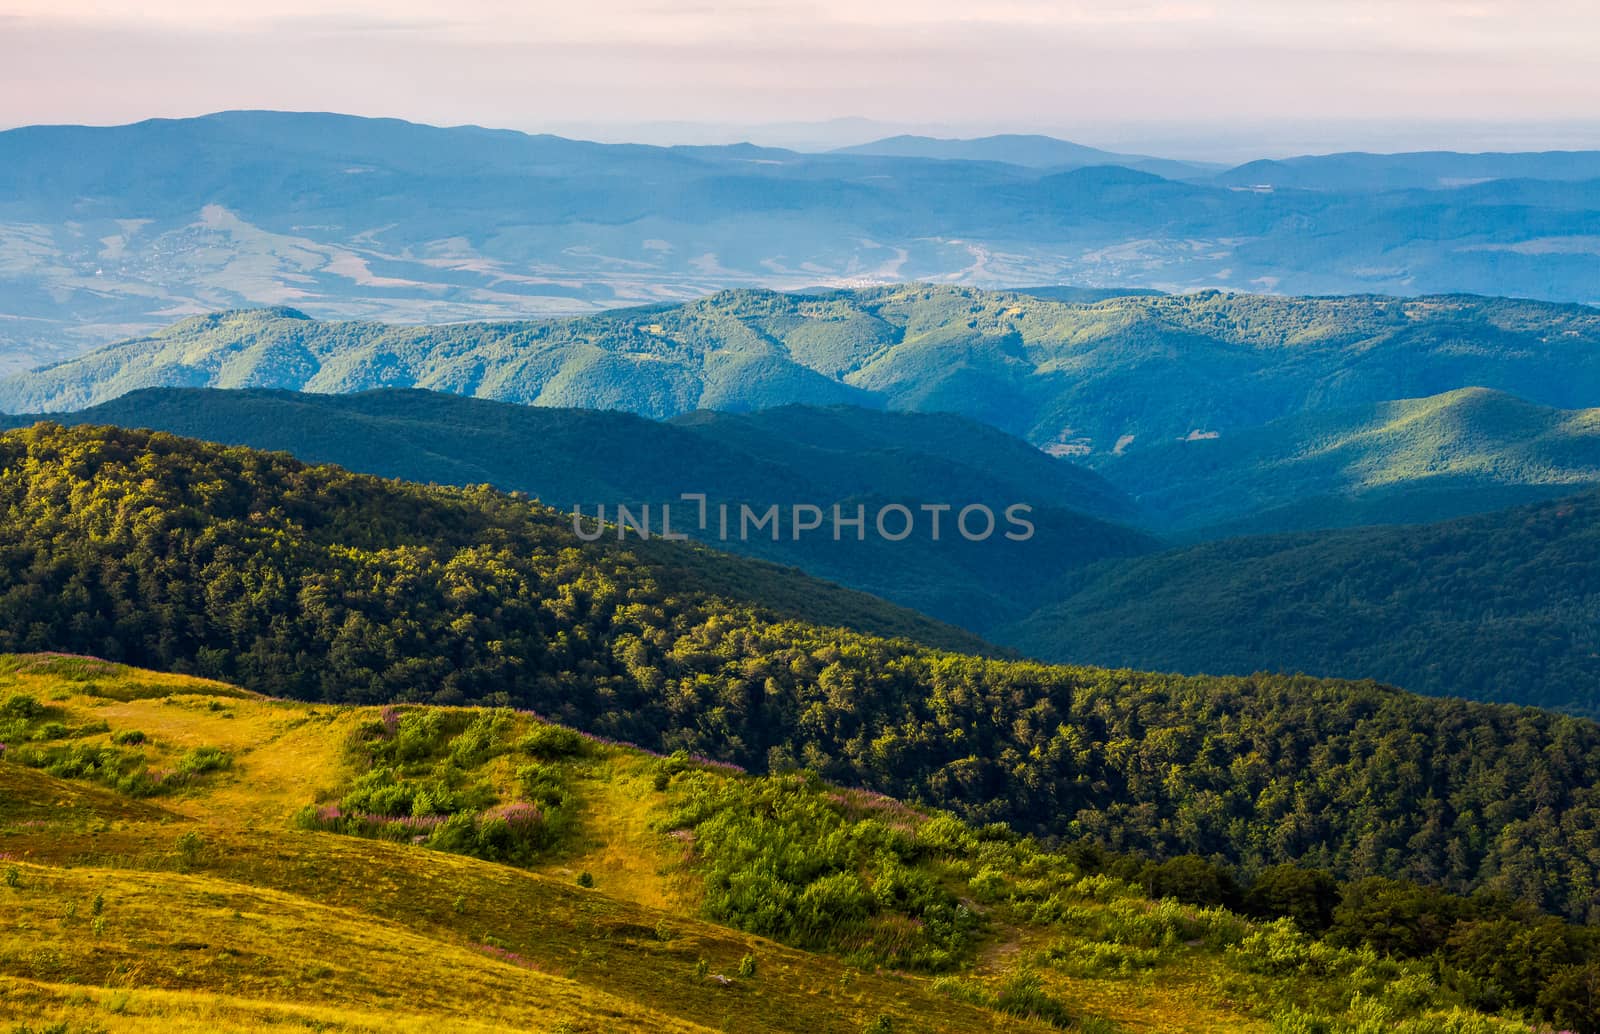 sun lit valley in afternoon. beautiful mountainous landscape and cloudy sky in golden light. lovely scenery after the storm. view from the top of a hill